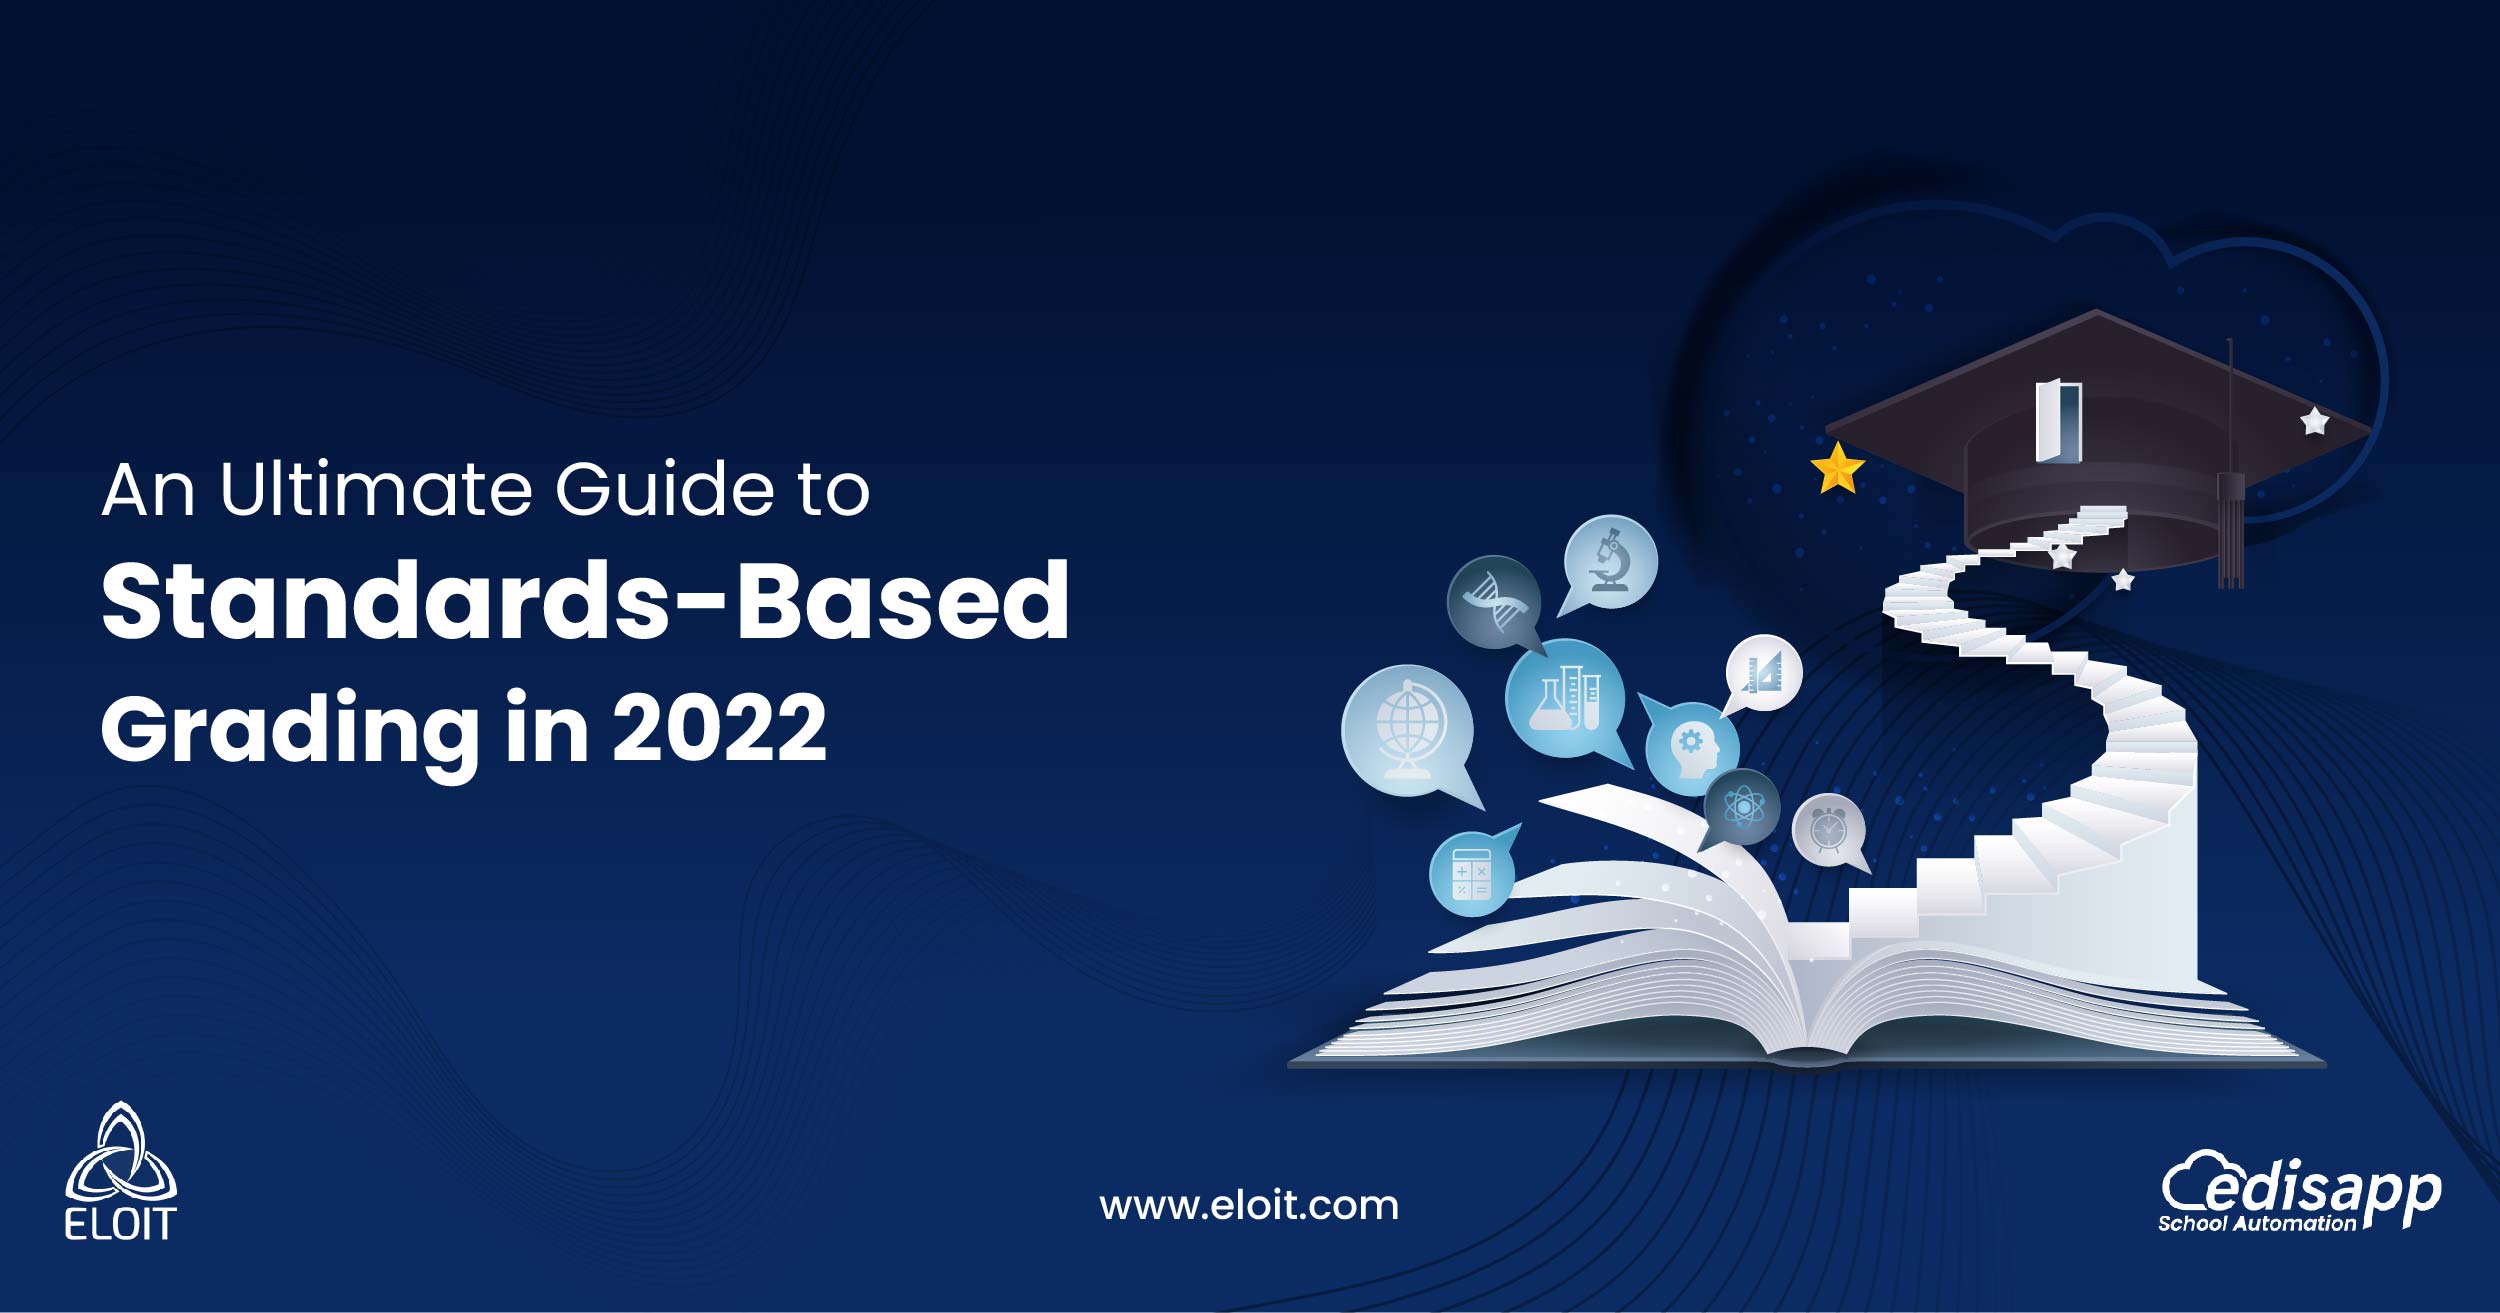 An Ultimate Guide to Standards-Based Grading in 2022